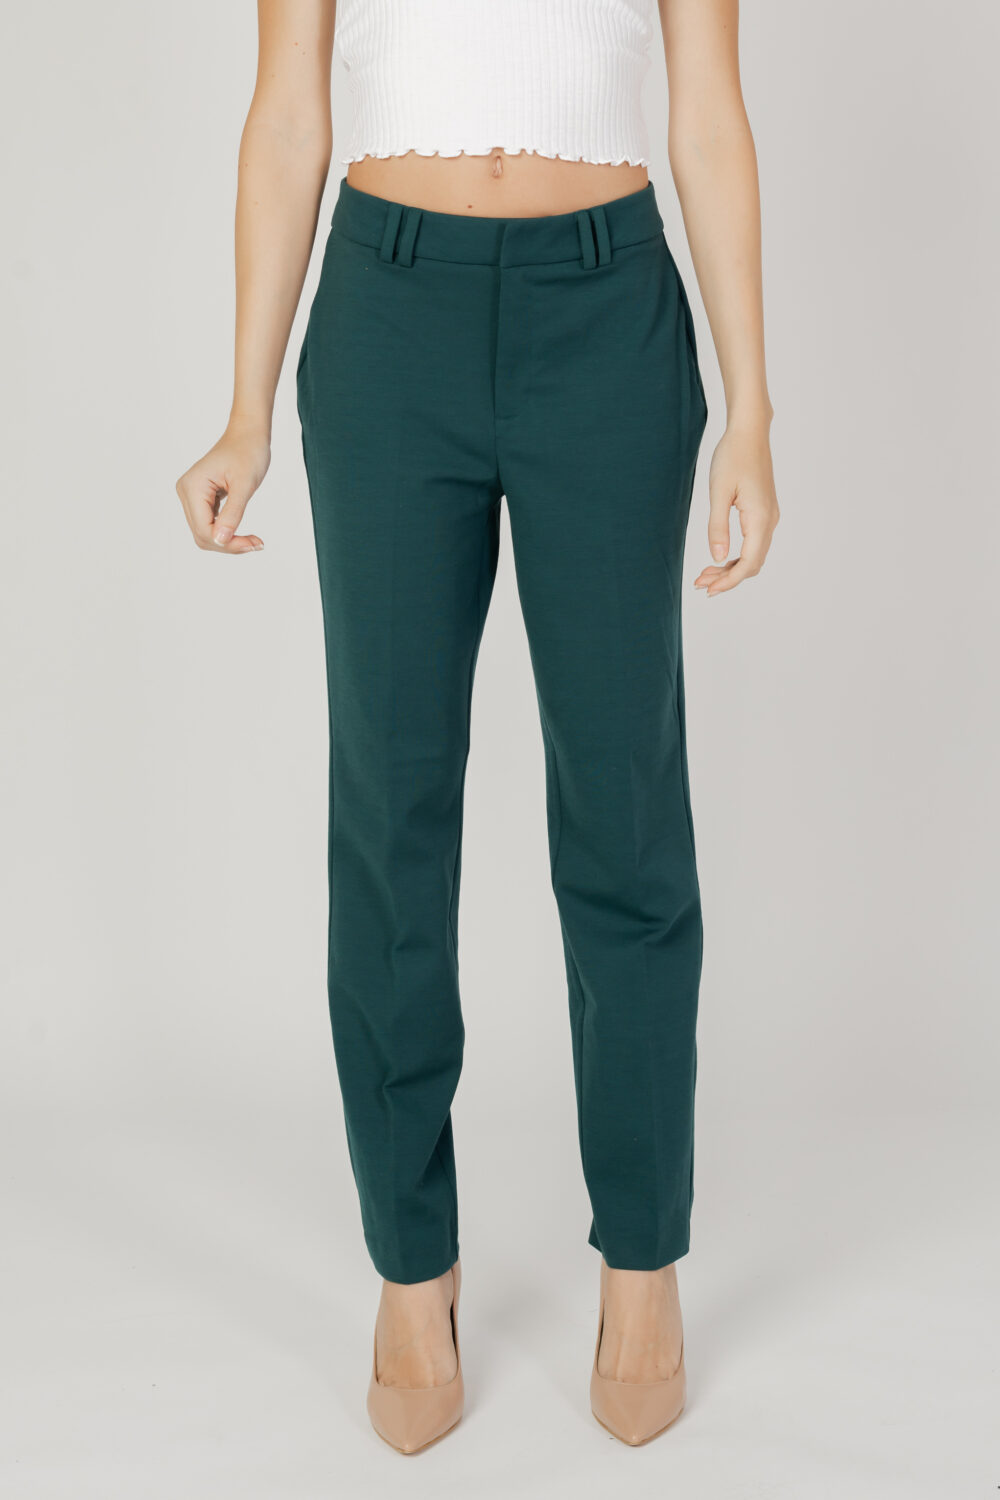 Pantaloni a sigaretta Only onlpeach mw cigarette ank pant tlr noos Verde - Foto 1